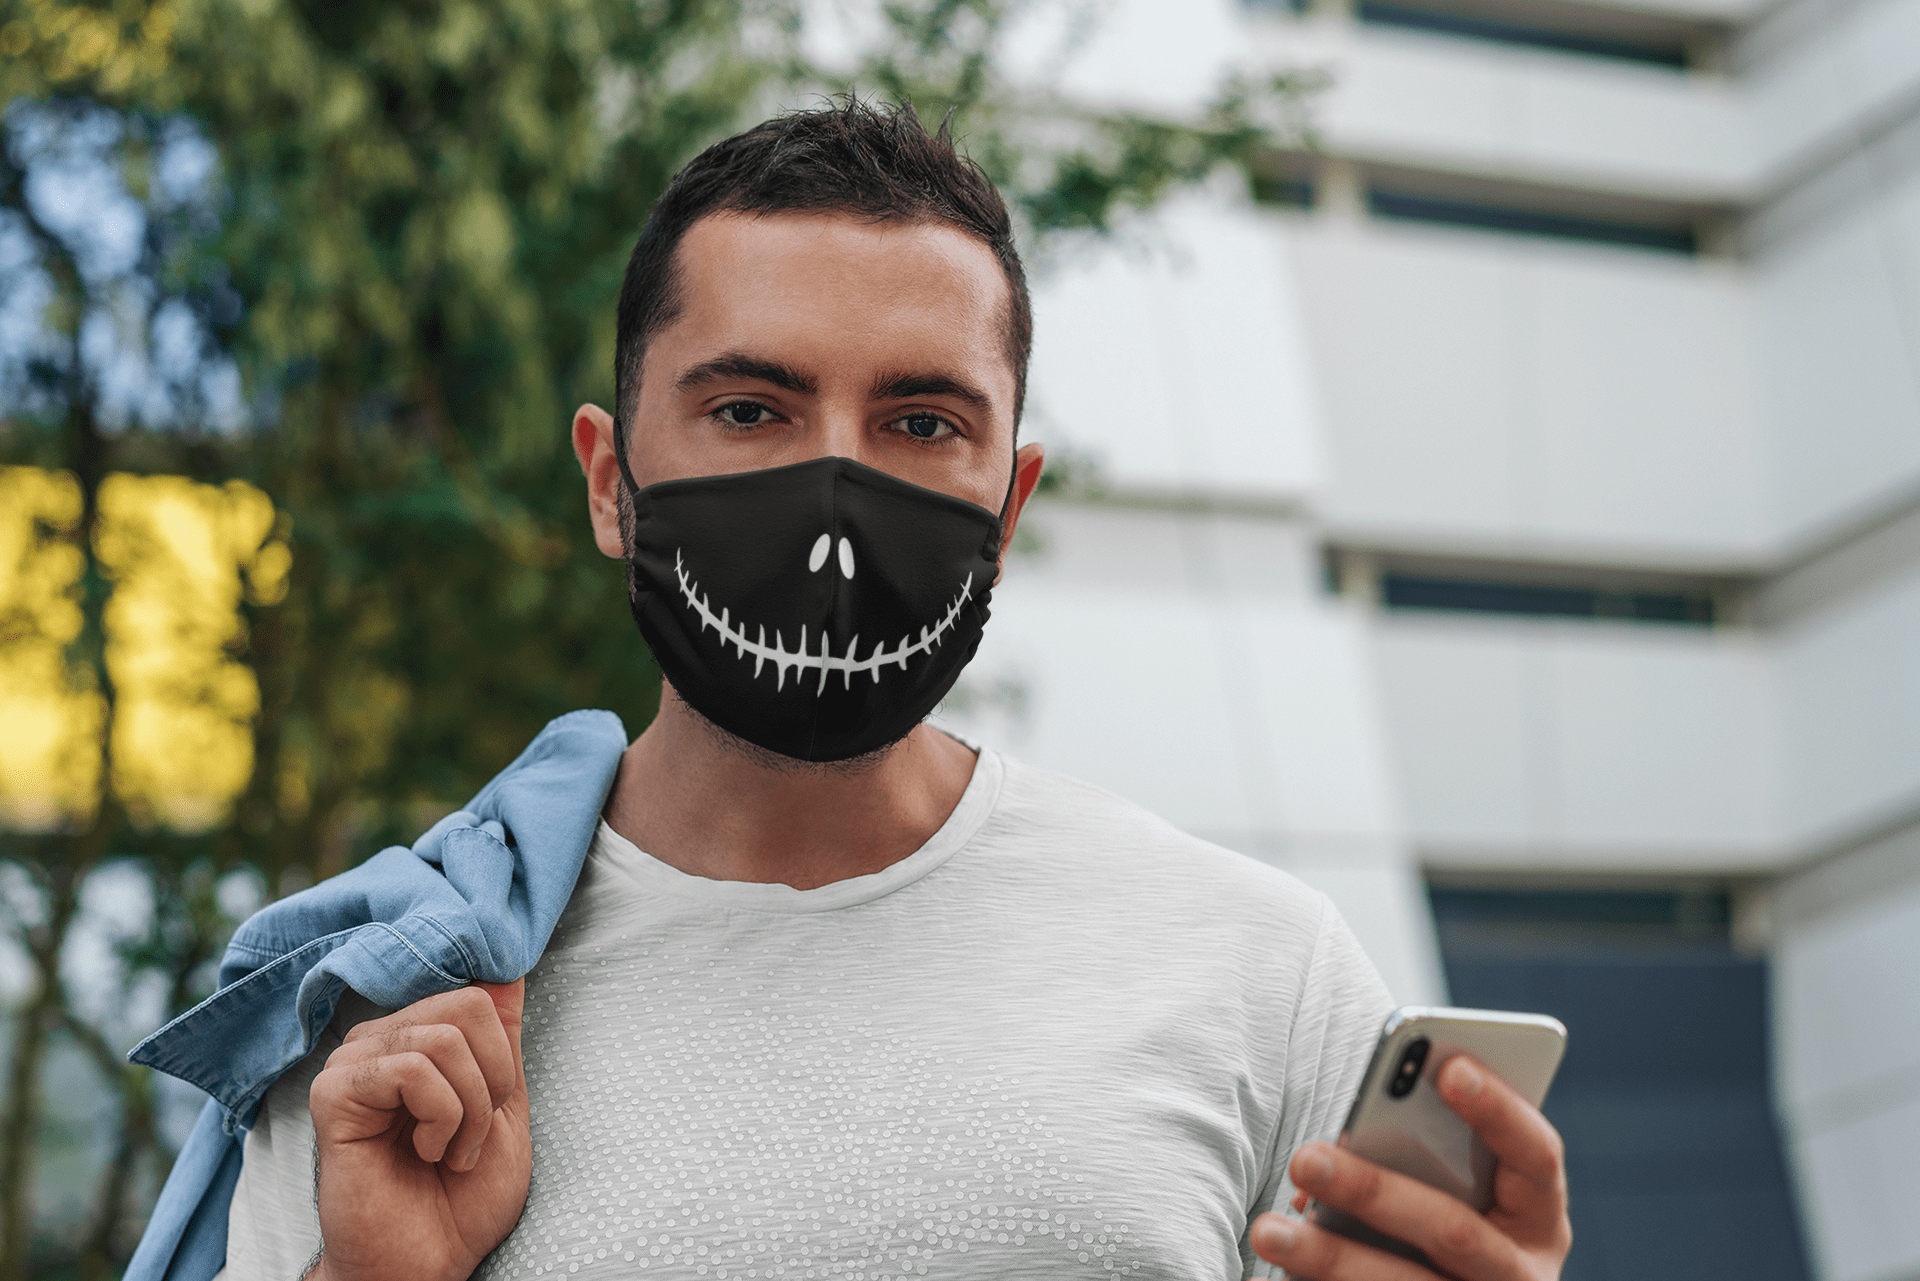 Devil Smile: Printed Tetra Shield Protection Mask Male